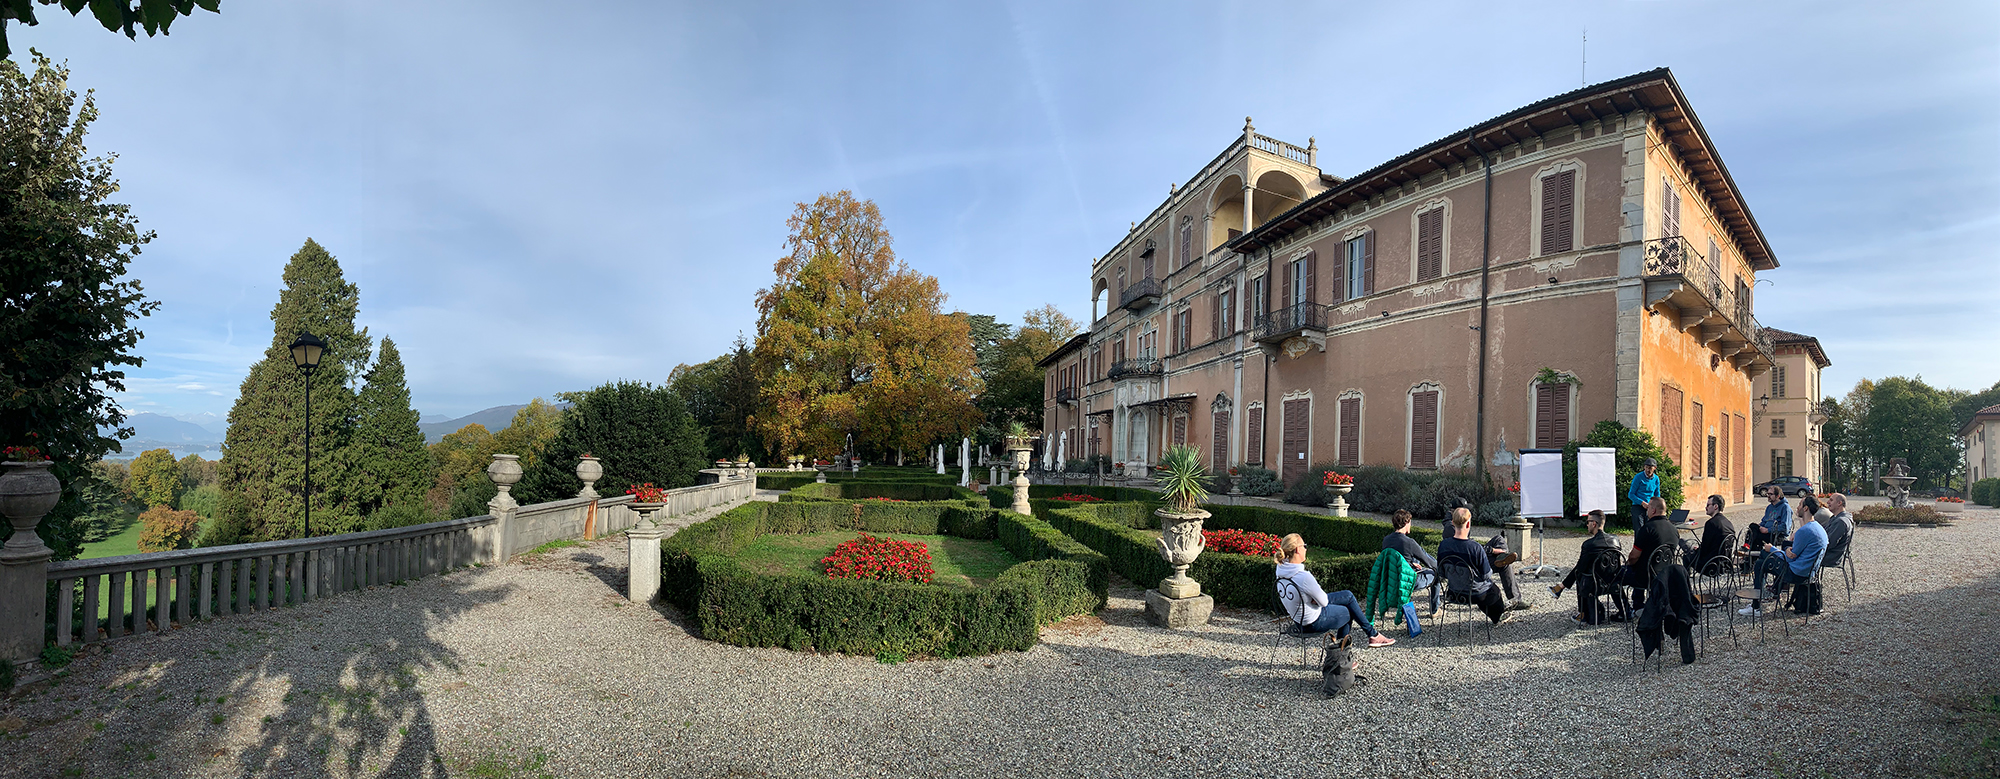 The CRS core team is meeting in the garden of Villa Cagnola for the roadmap discussion